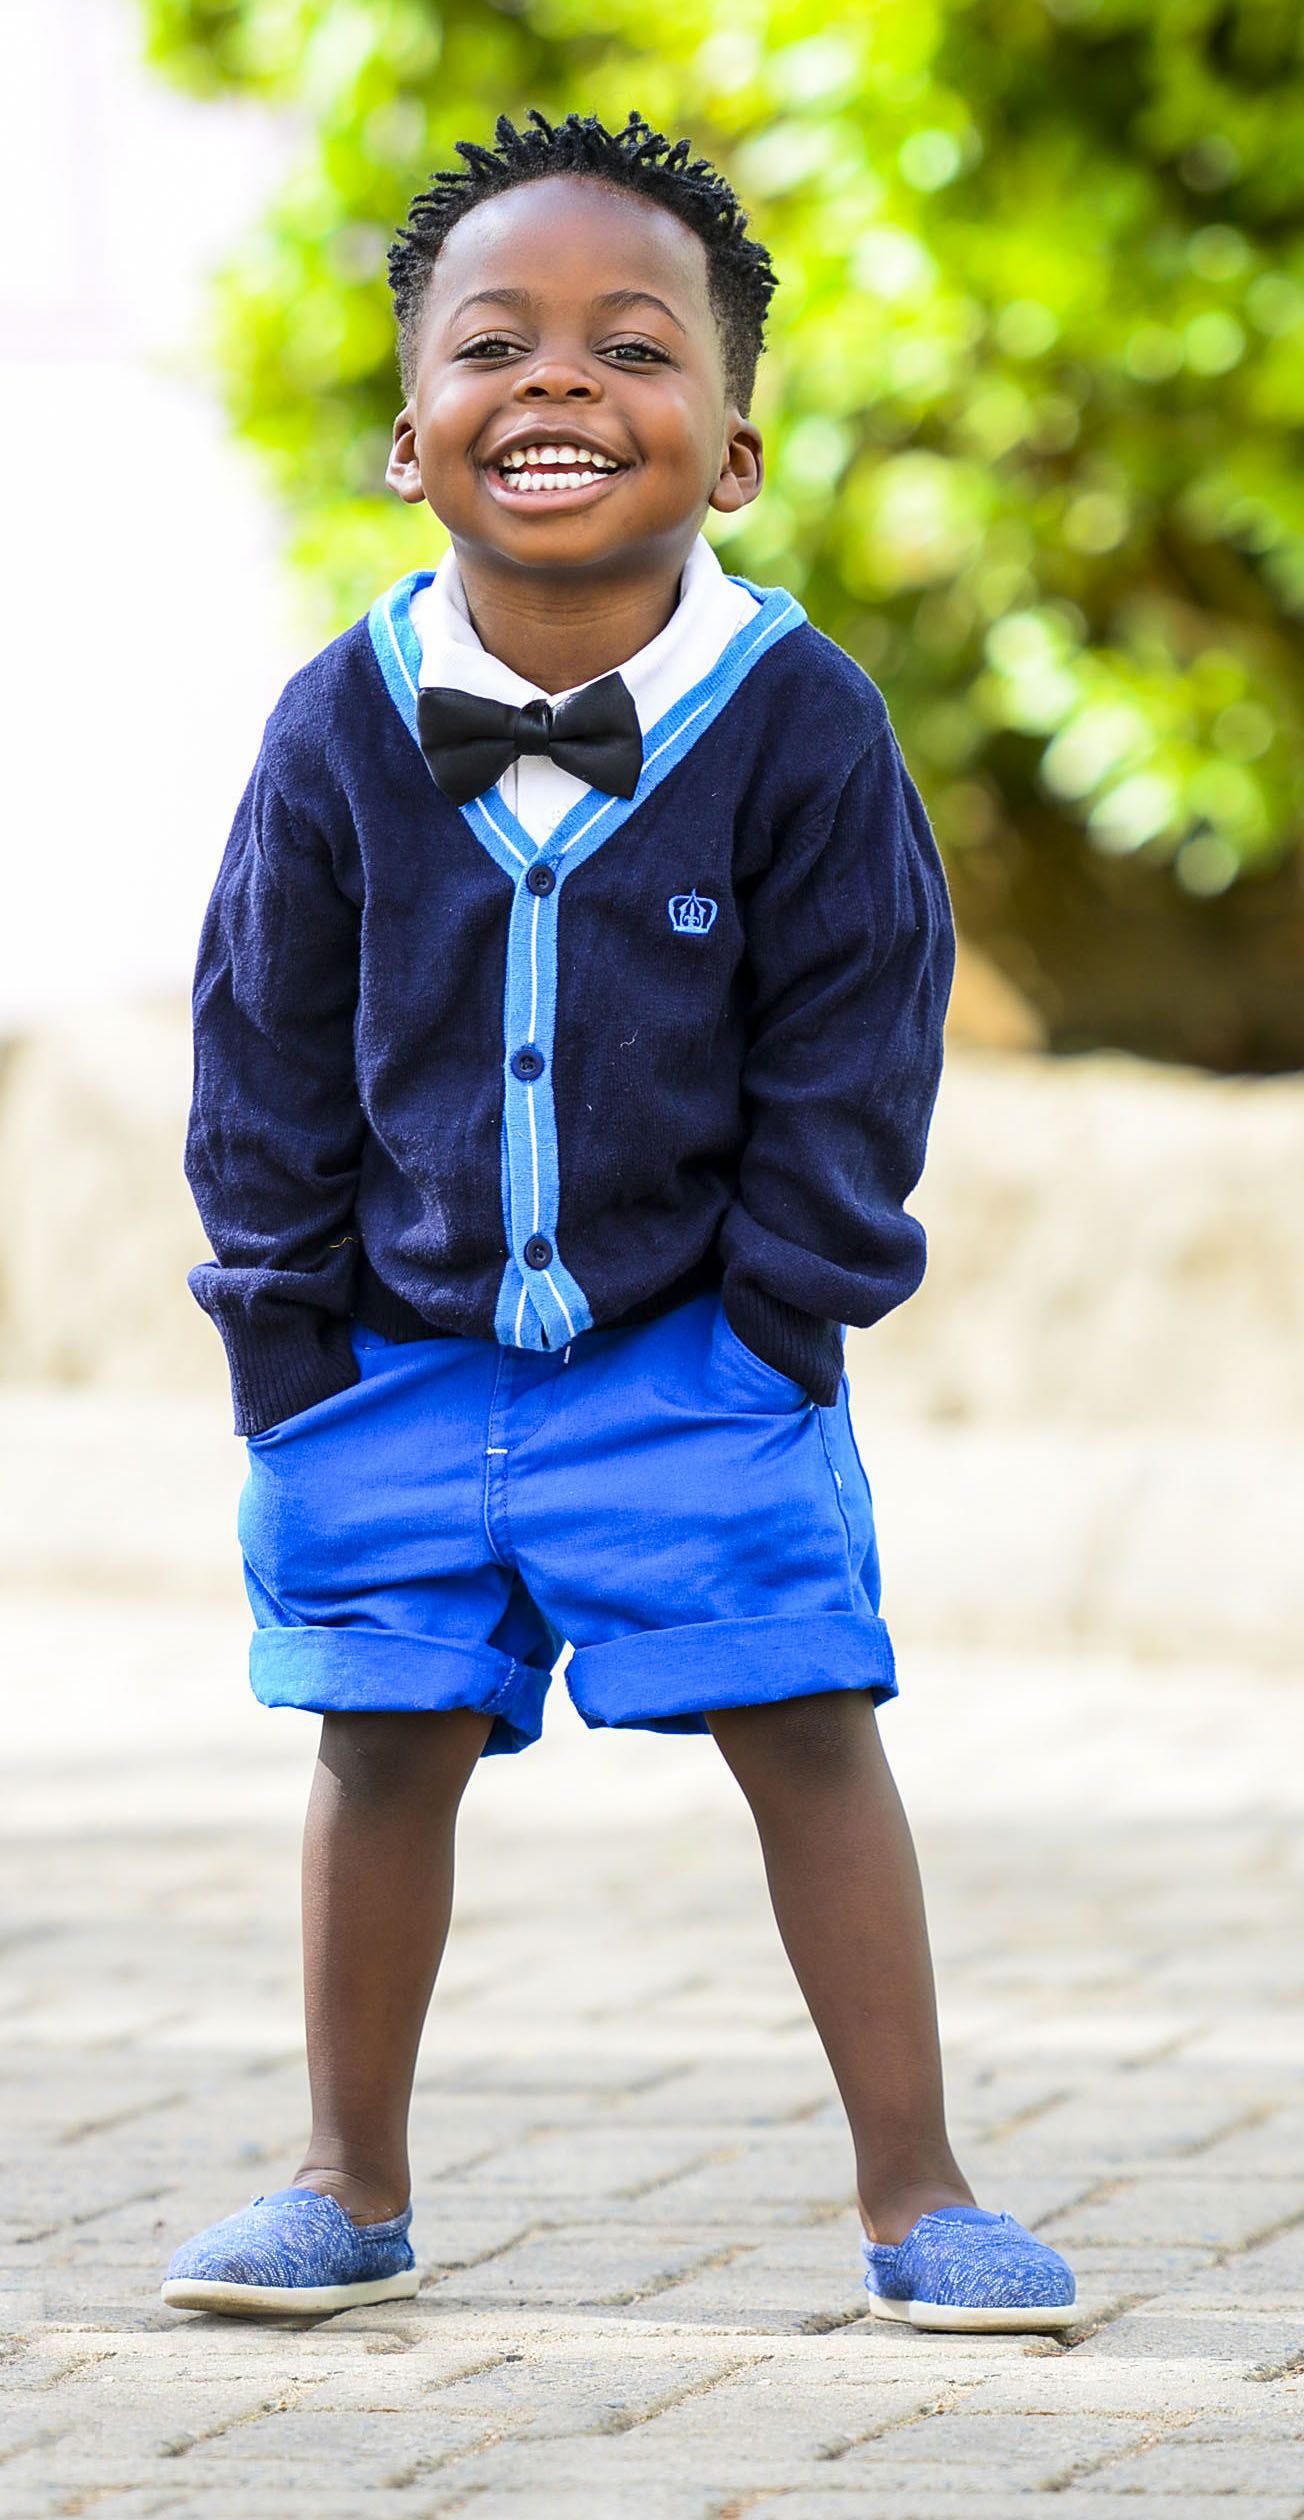 A young (around 4) black child, in a blue button down sweater and blue shorts, faces us as he smiles. His hands are in his pockets.